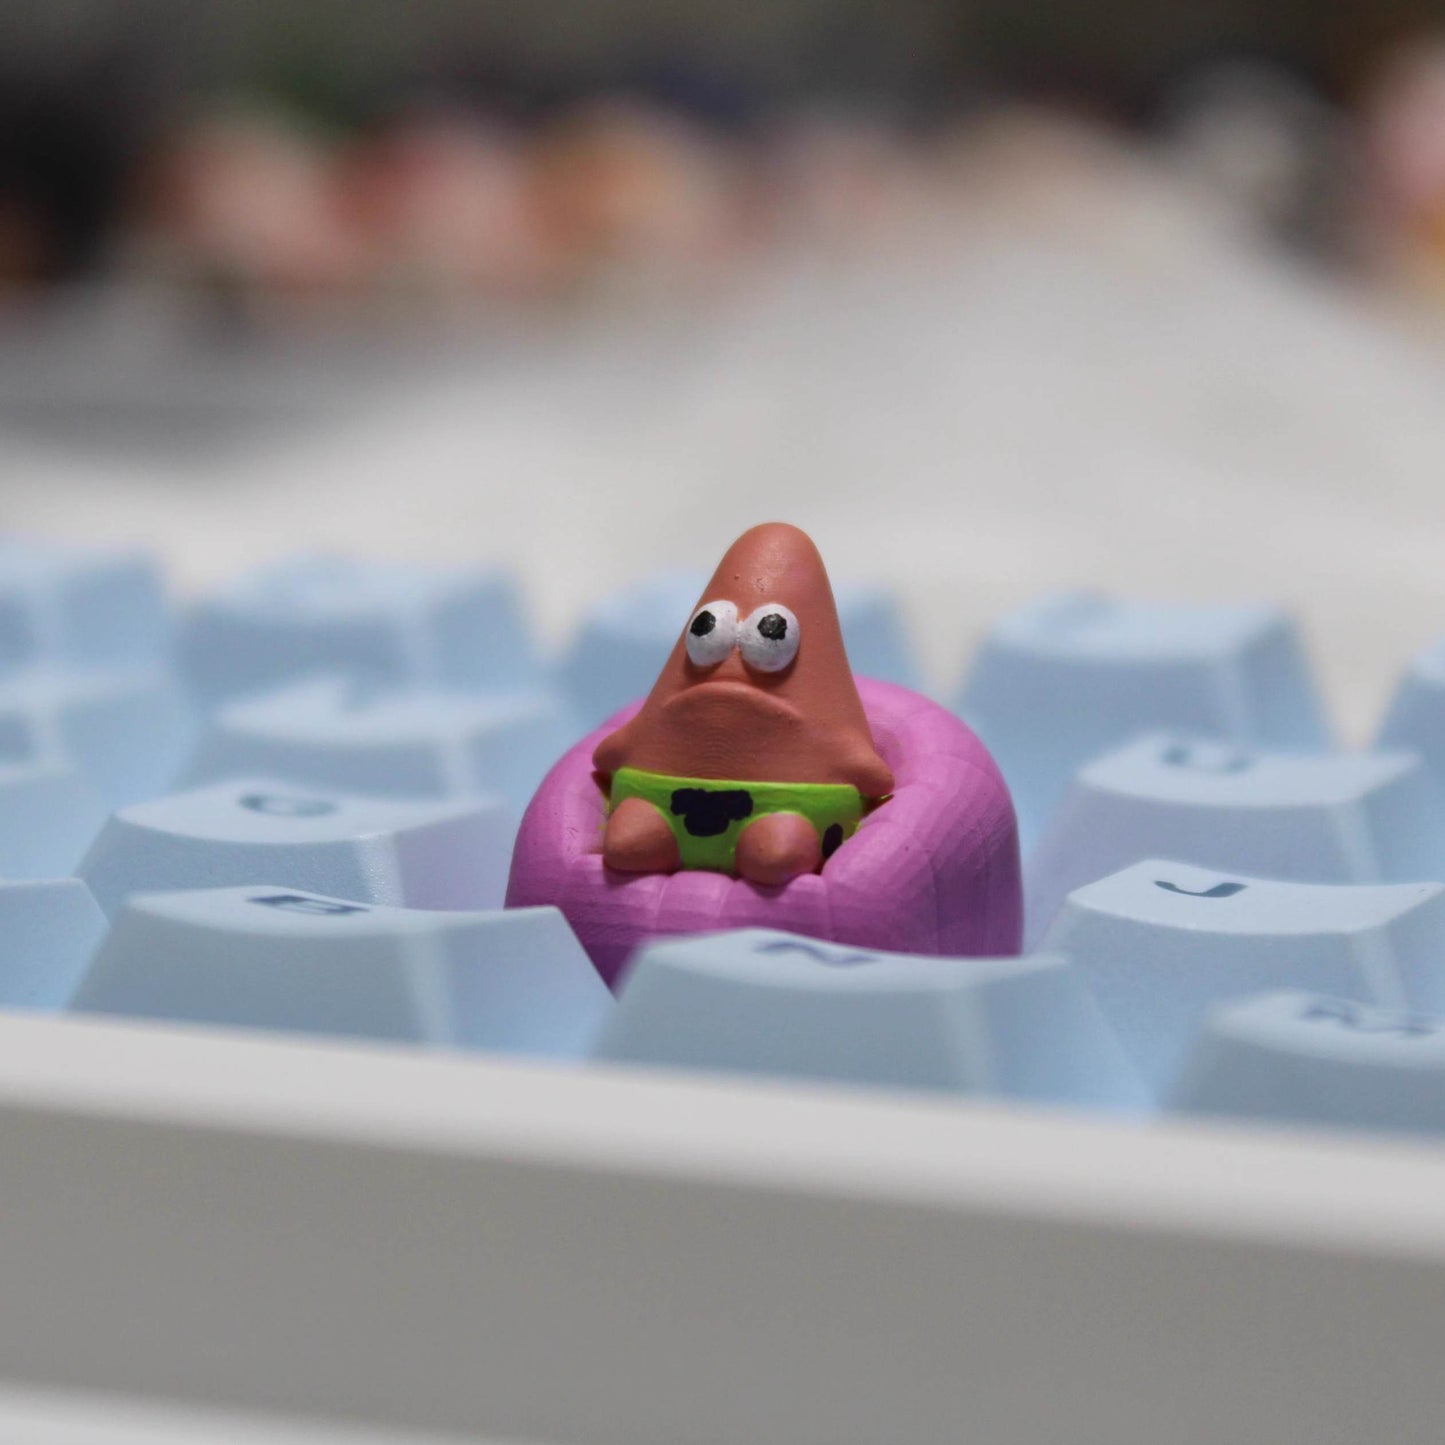 "Dive into the whimsical world of Bikini Bottom with our SpongeBob and Patrick Custom Artisan Keycaps. These 3D-printed keycaps are not just accessories; they're a playful homage to the iconic duo. Imagine SpongeBob asking, 'Hey Patrick, do you know what's funnier than 24?' and Patrick responding, 'Umm, 25?' Each keystroke becomes a snippet of their hilarious banter. Crafted with precision and humor, these keycaps bring the charm of SpongeBob and Patrick to your fingertips. 